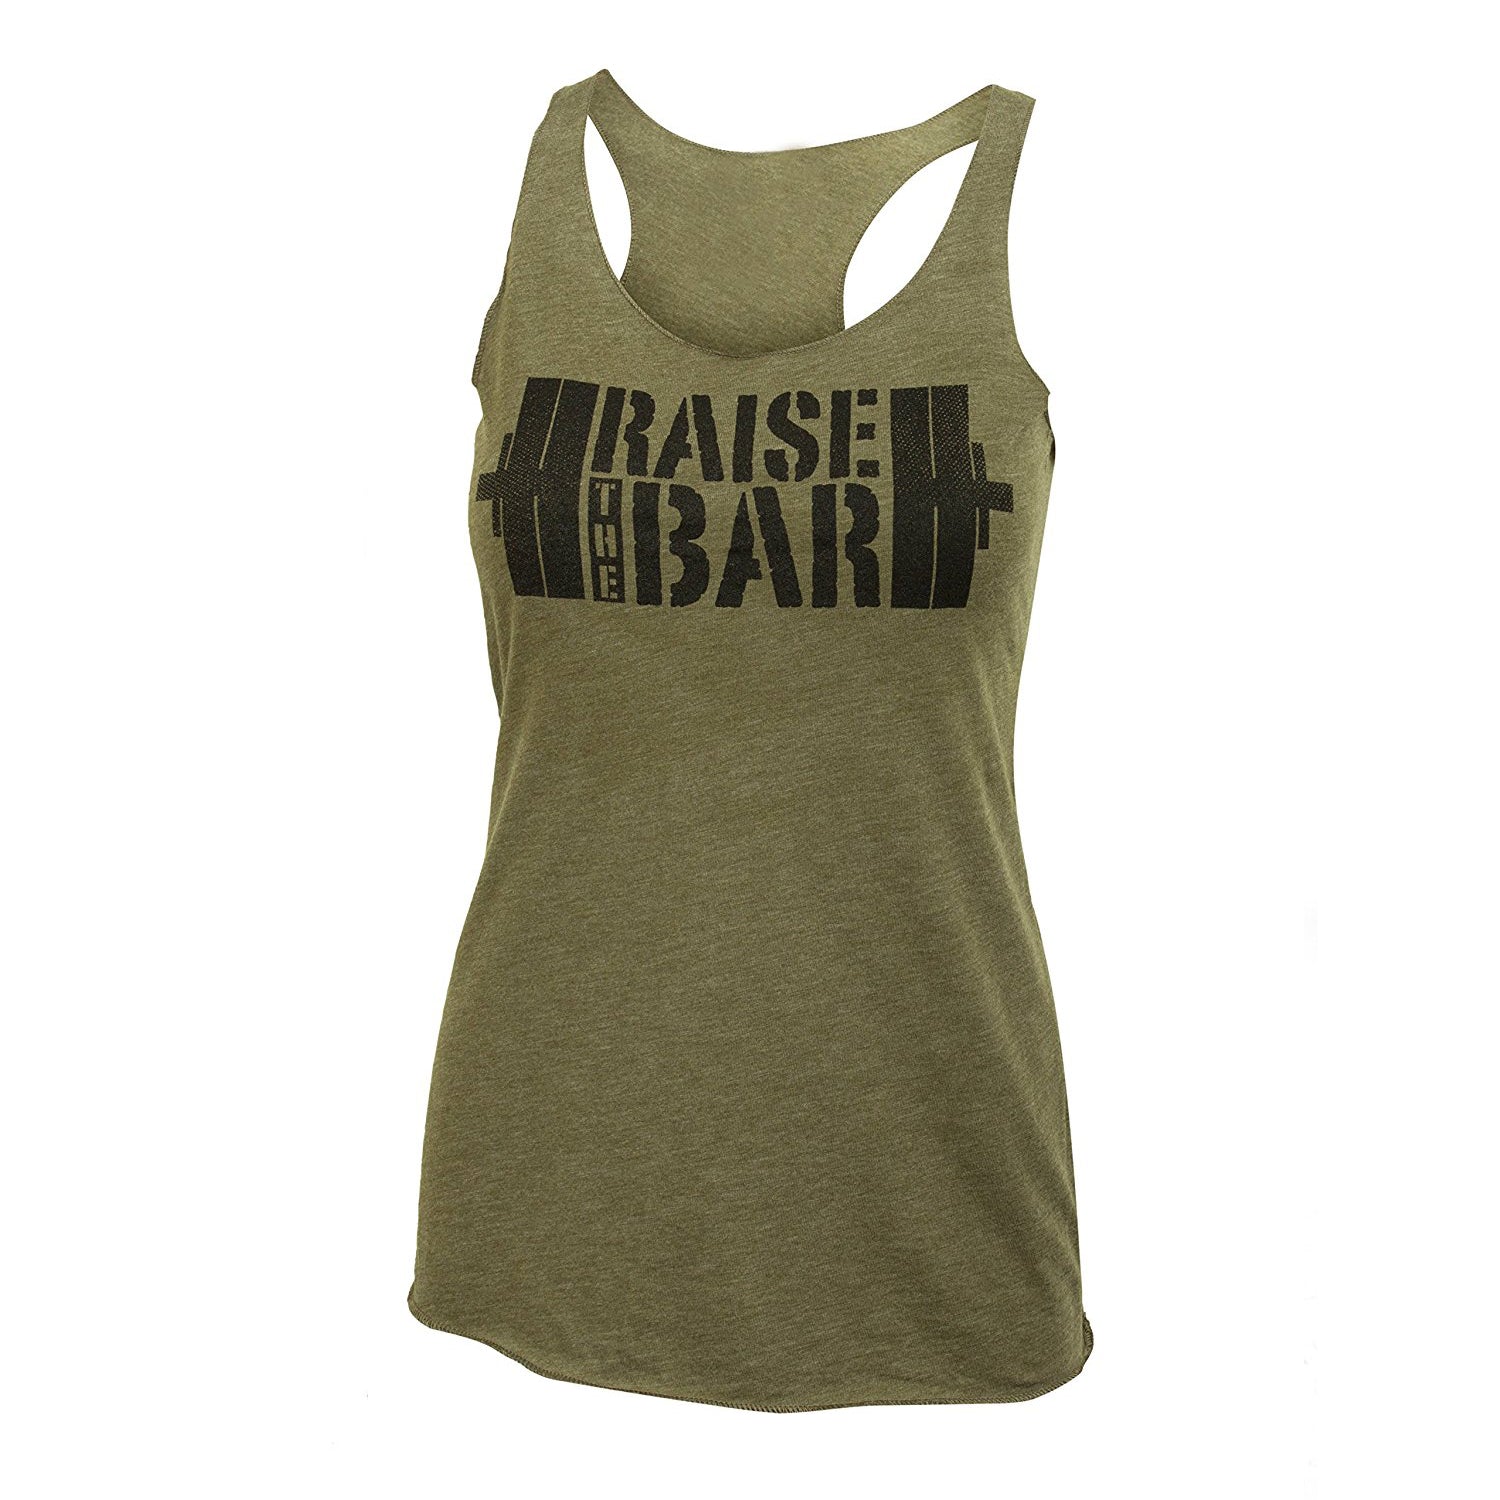 Raise the Bar Women's Barbell Military Green Workout Tank Top for Crossfit & Gym - Everyday Crosstrain